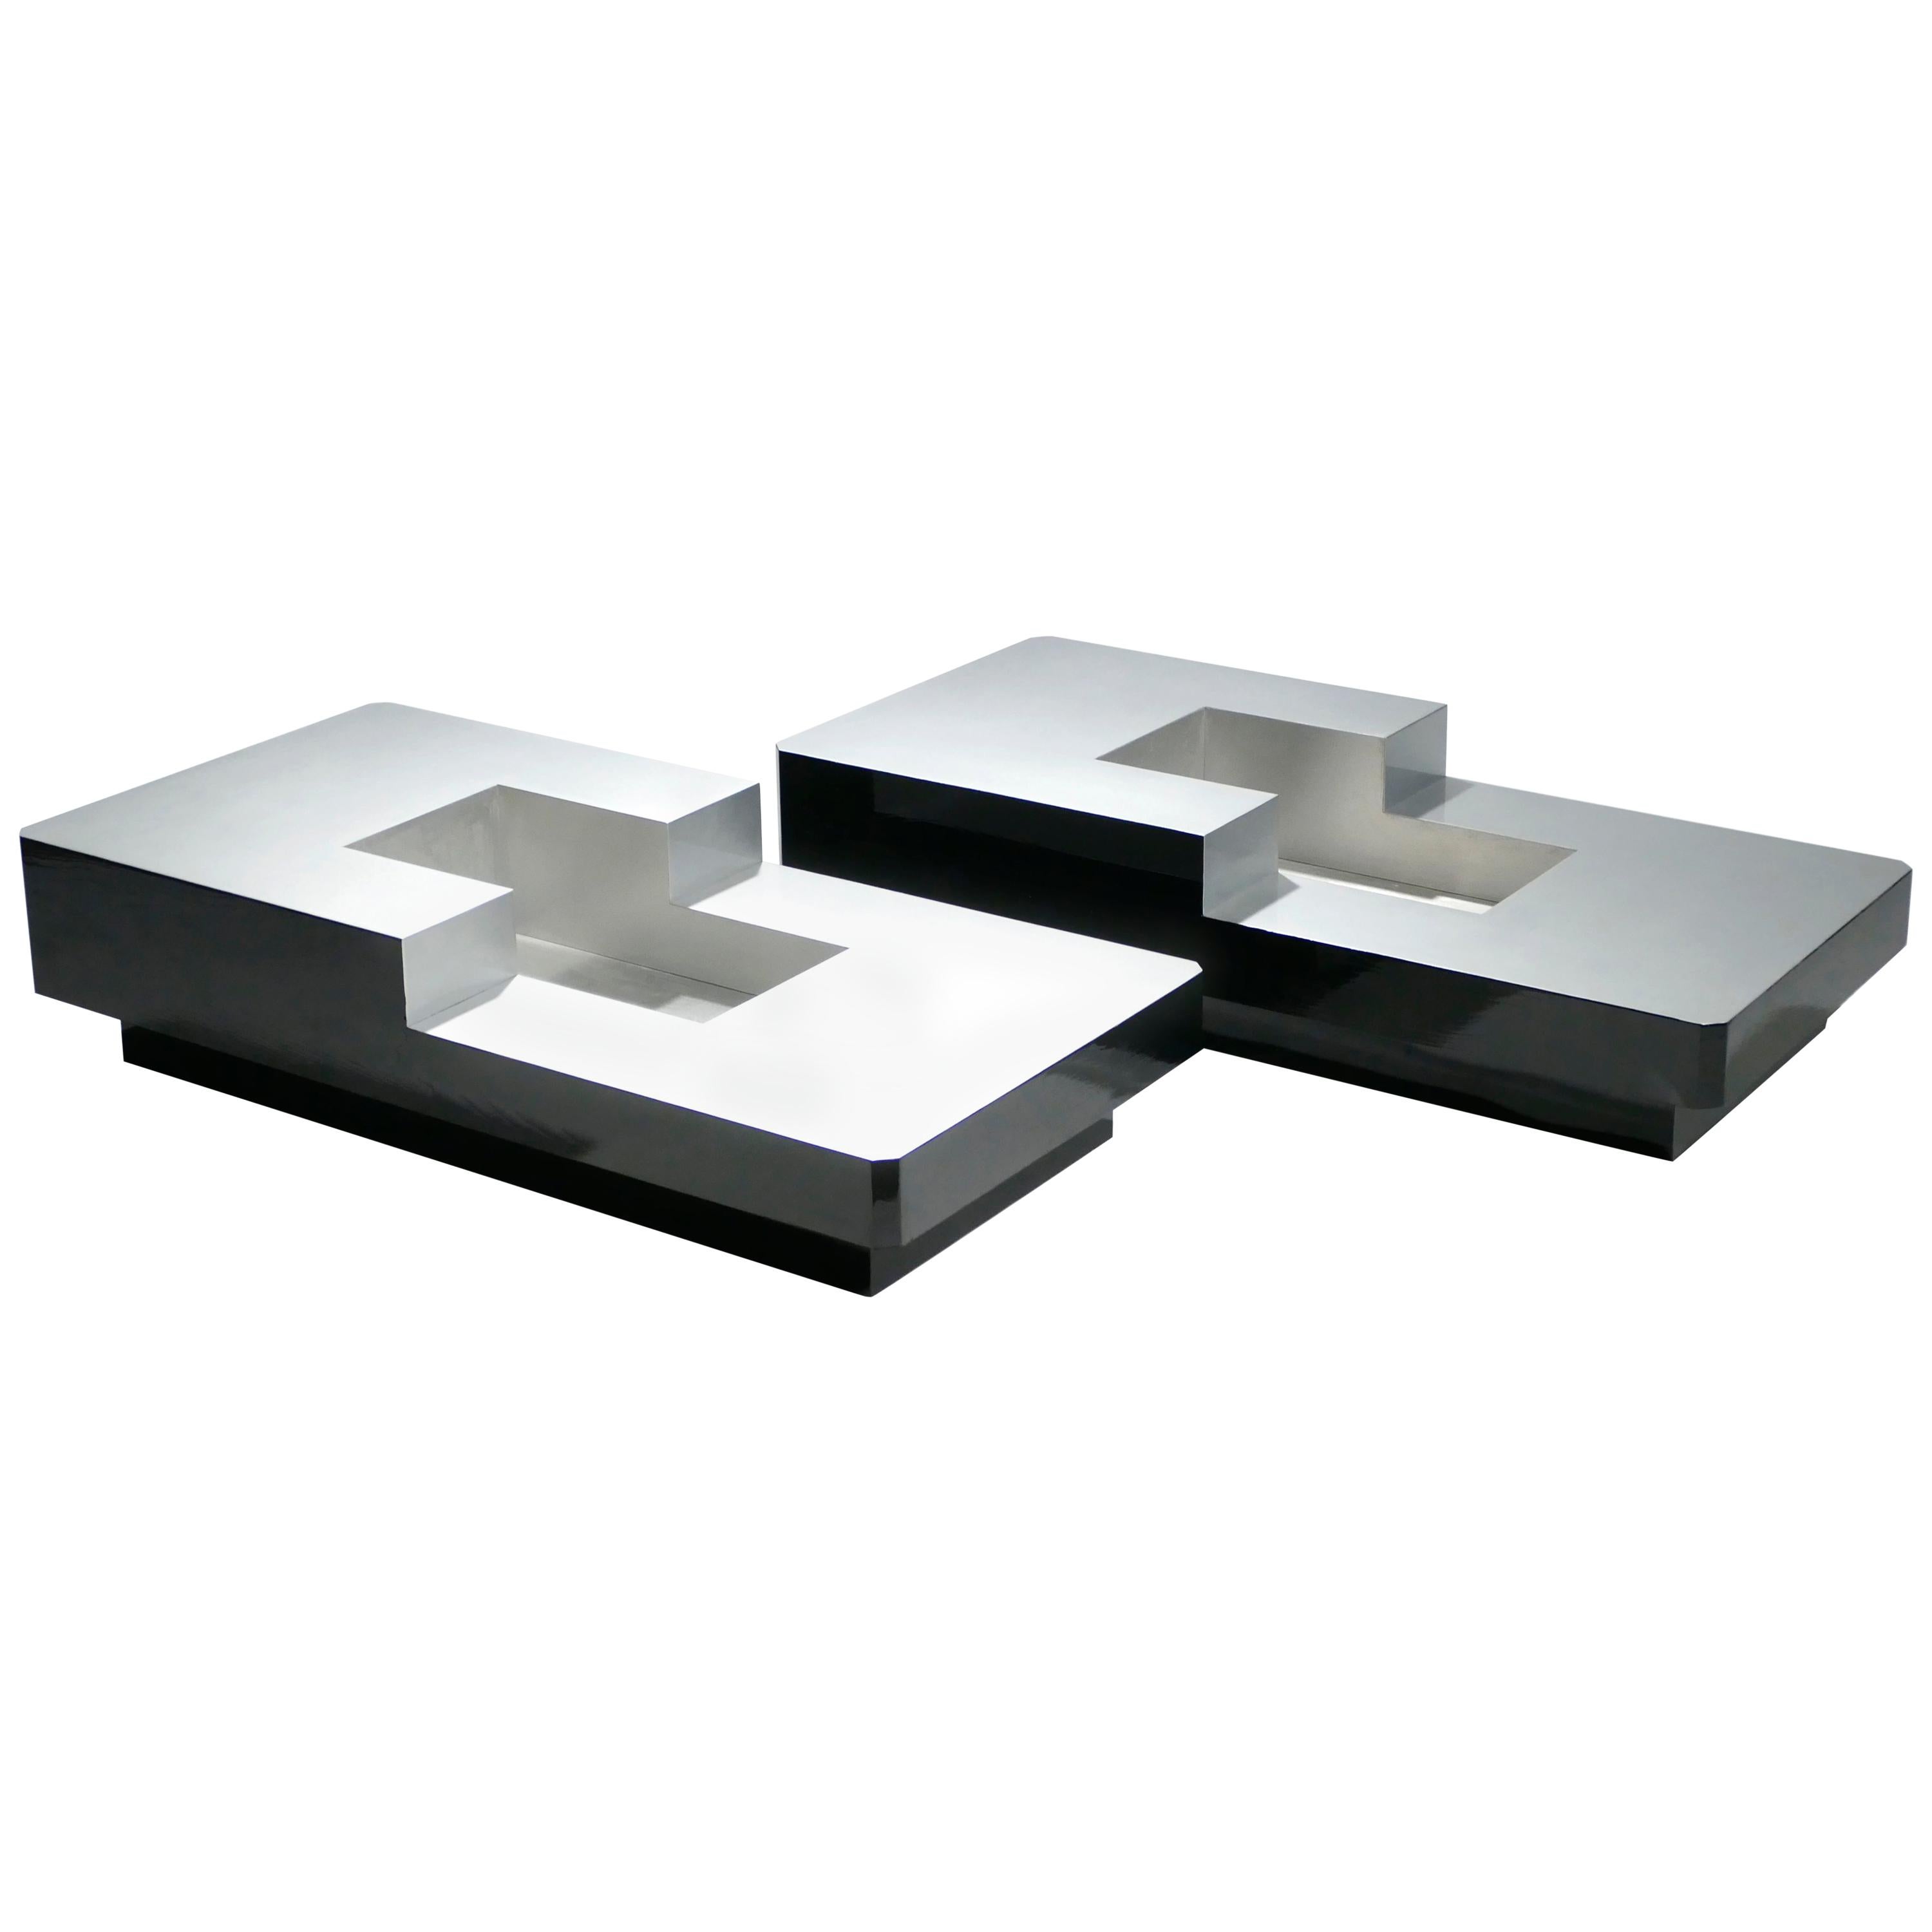 An interesting piece by Italian designer Willy Rizzo, this pair of coffee tables features a bar space in the center, typical of the designer’s work. Its sophisticated color scheme—a lacquered light grey top and black sides—give the pieces a